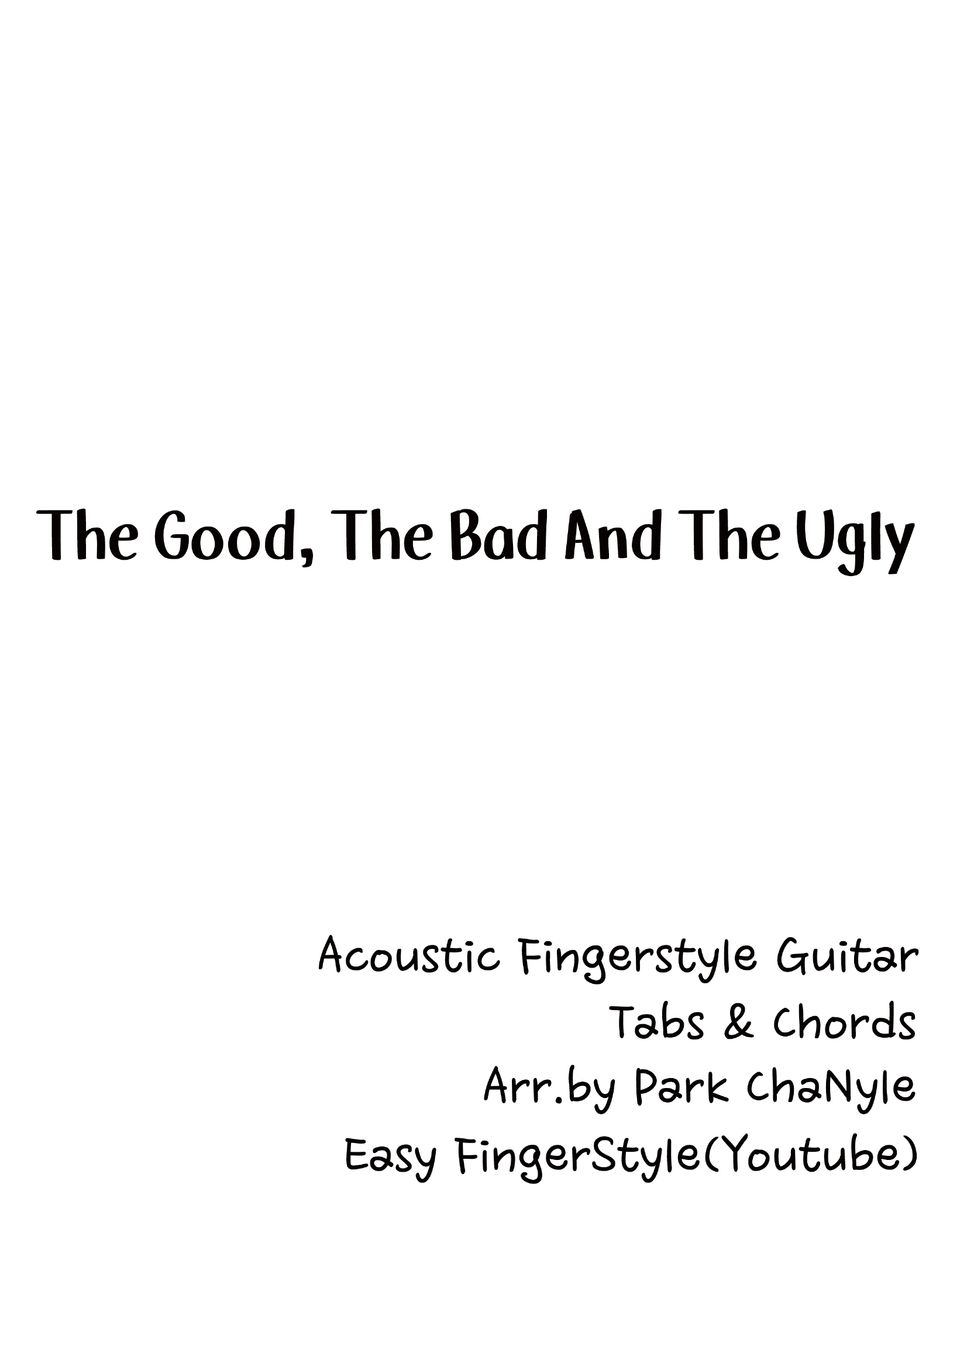 Ennio Morricone - The Good, The Bad And The Ugly (Fingerstyle Guitar) by Park ChaNyle